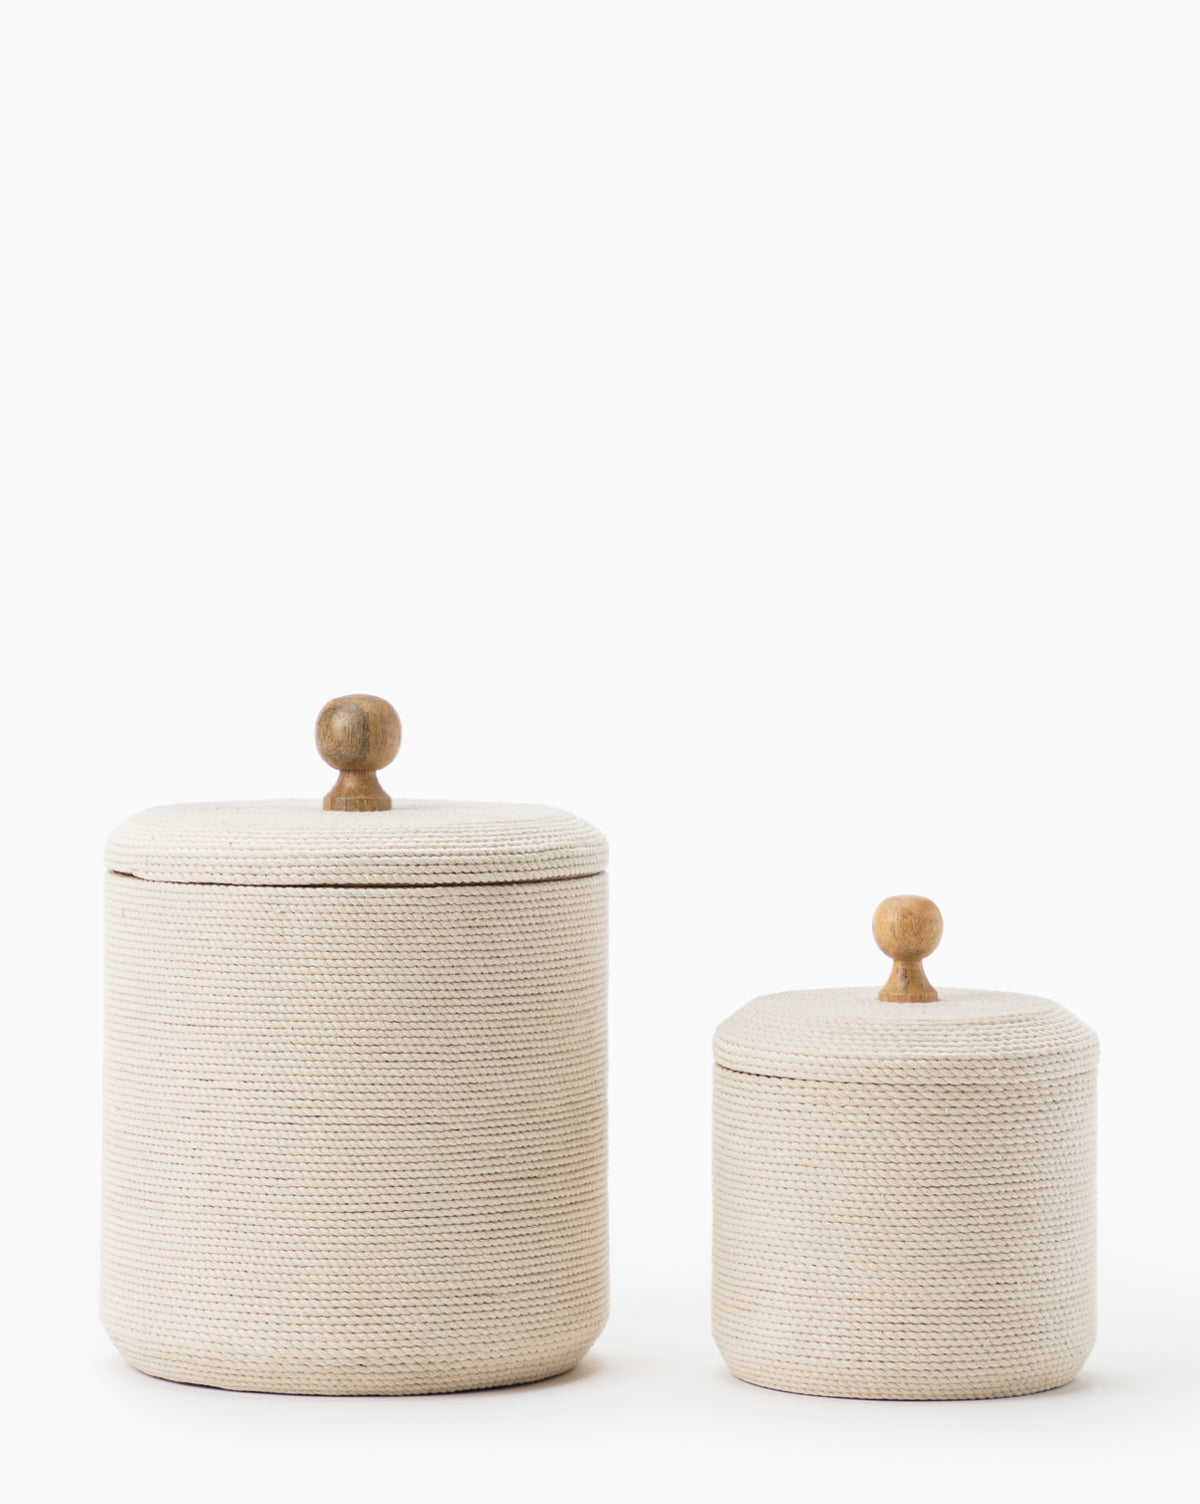 KK Interiors, Wrapped Lidded Container